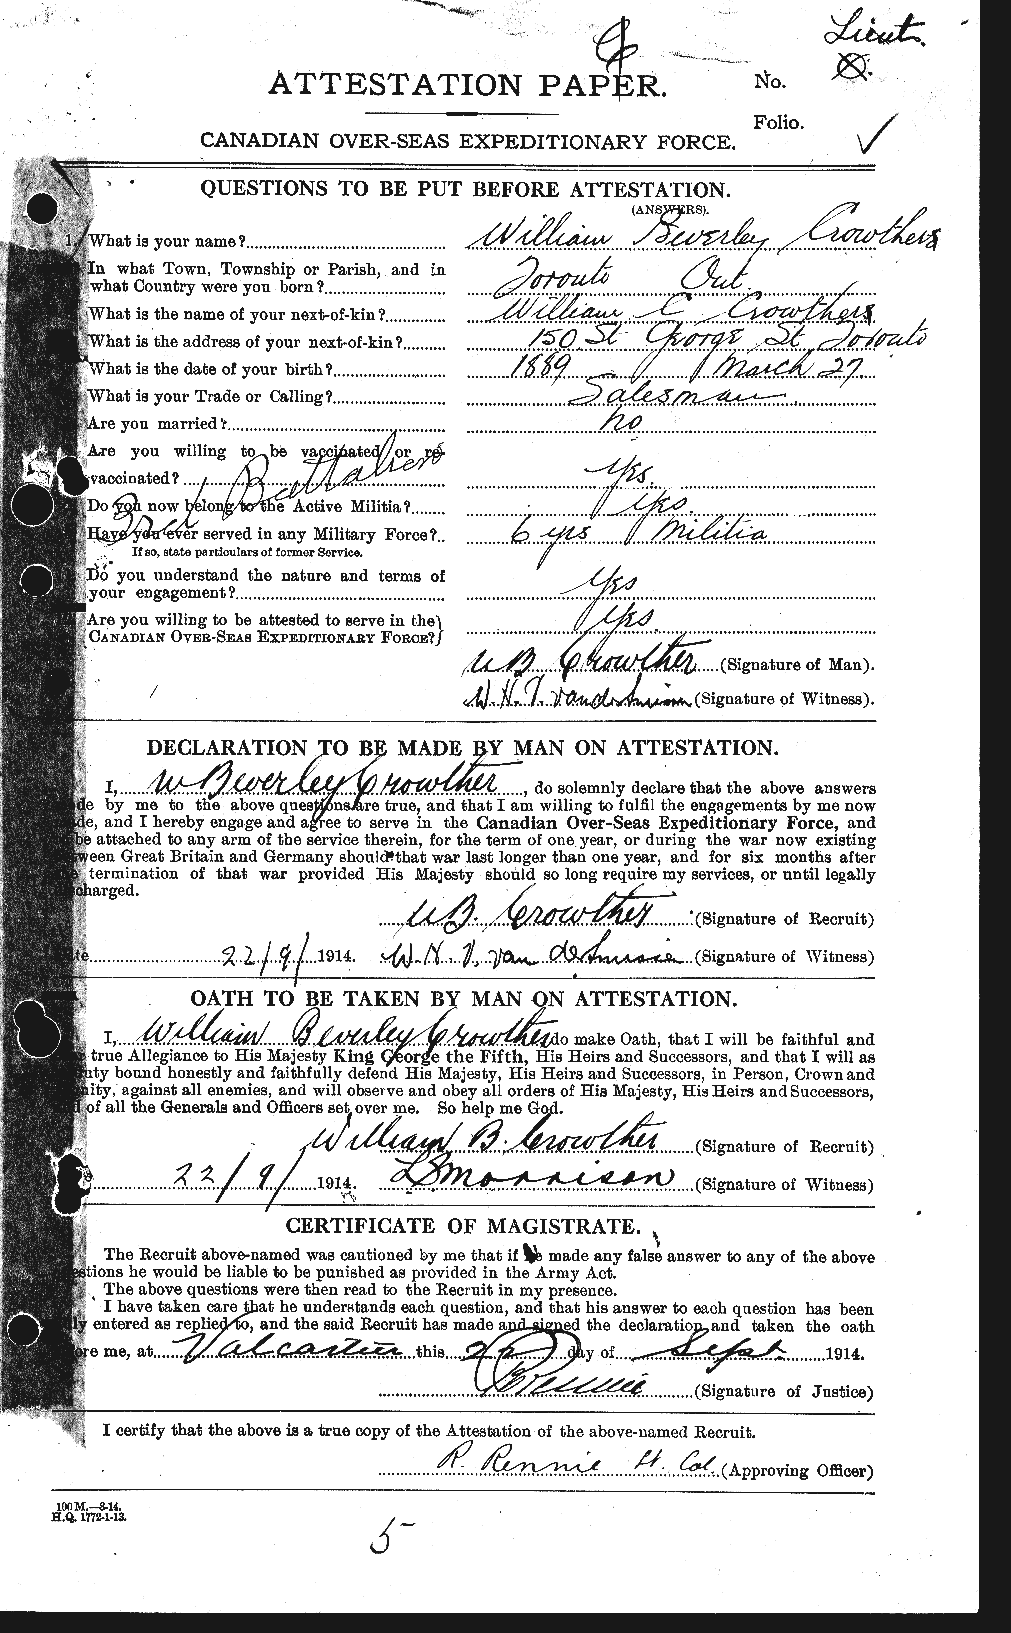 Attestation record: William Beverley Crowther